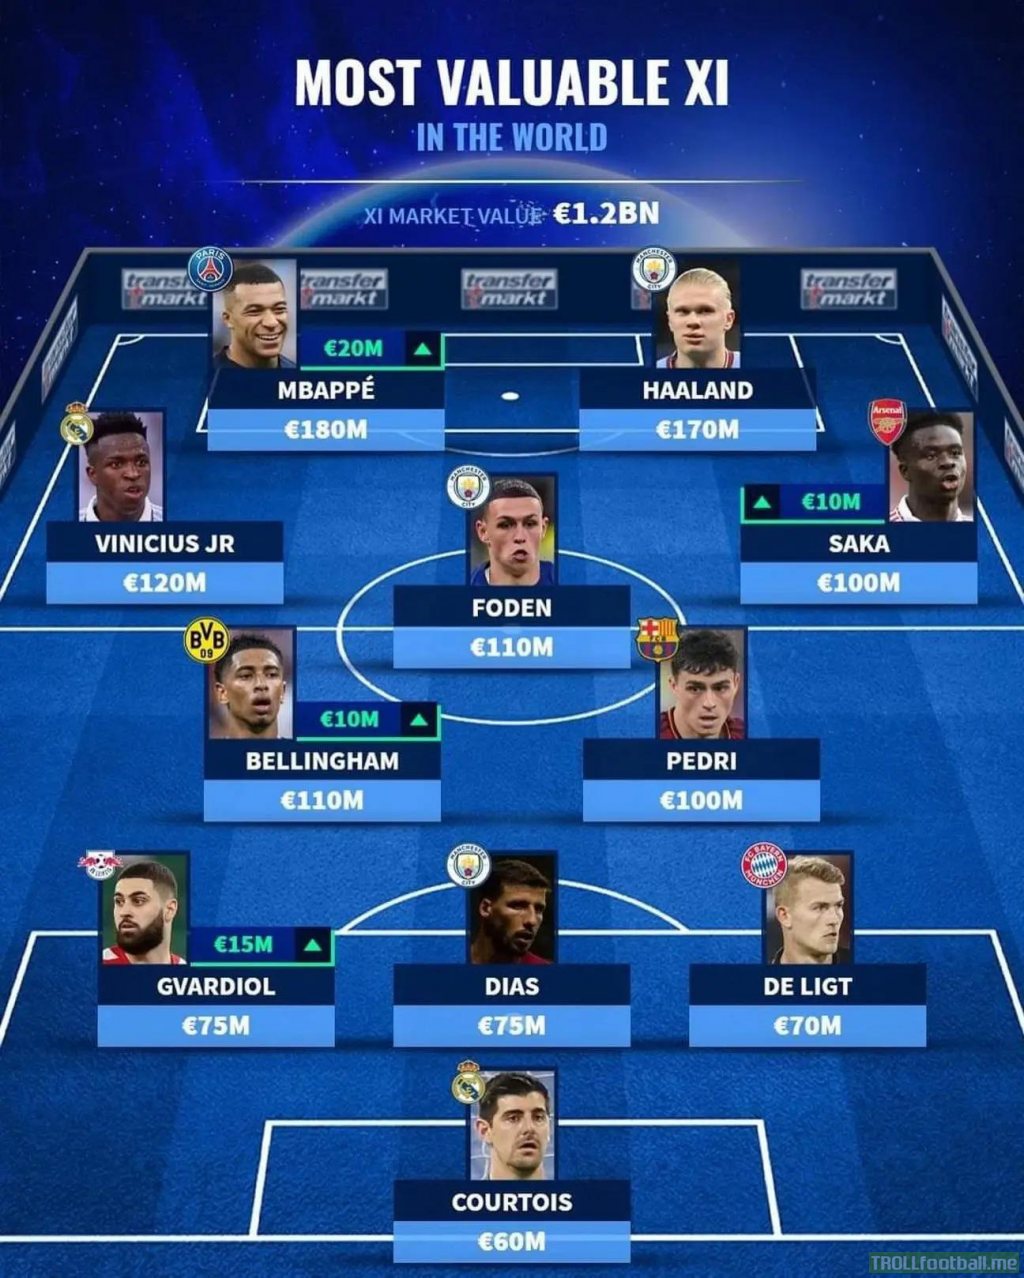 The world’s most valuable XI